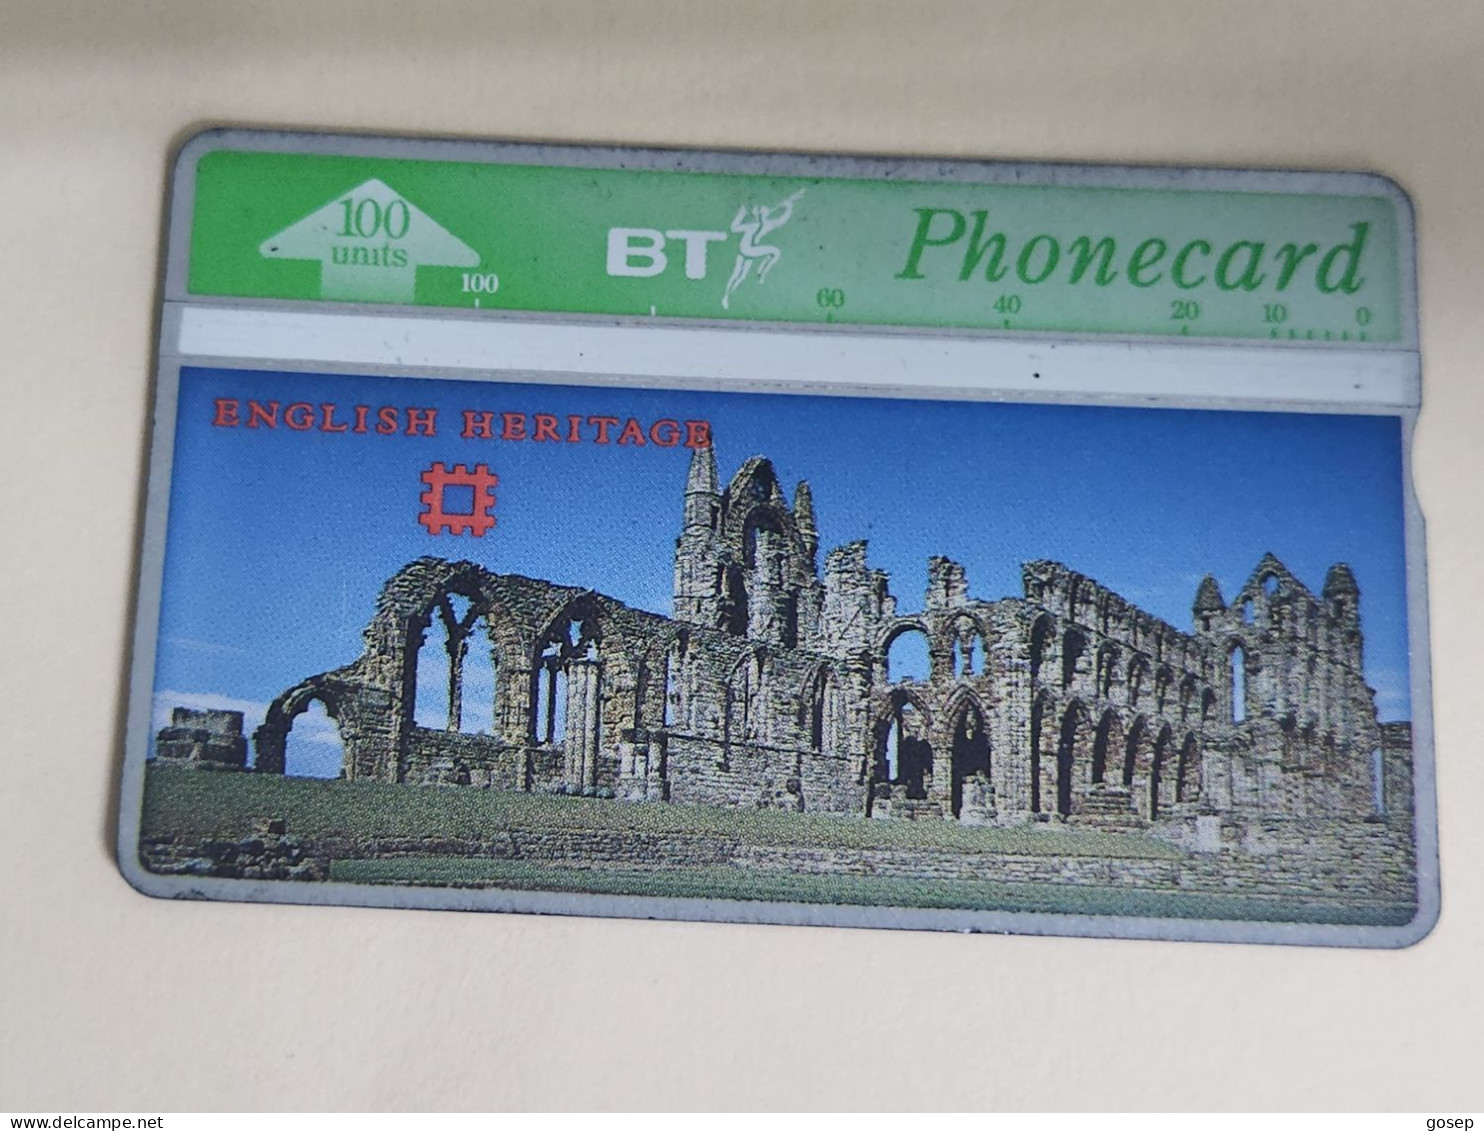 United Kingdom-(BTA122)-HERITAGE-Whitby Abbey-(217)(100units)(527H30198)price Cataloge3.00£-used+1card Prepiad Free - BT Emissions Publicitaires